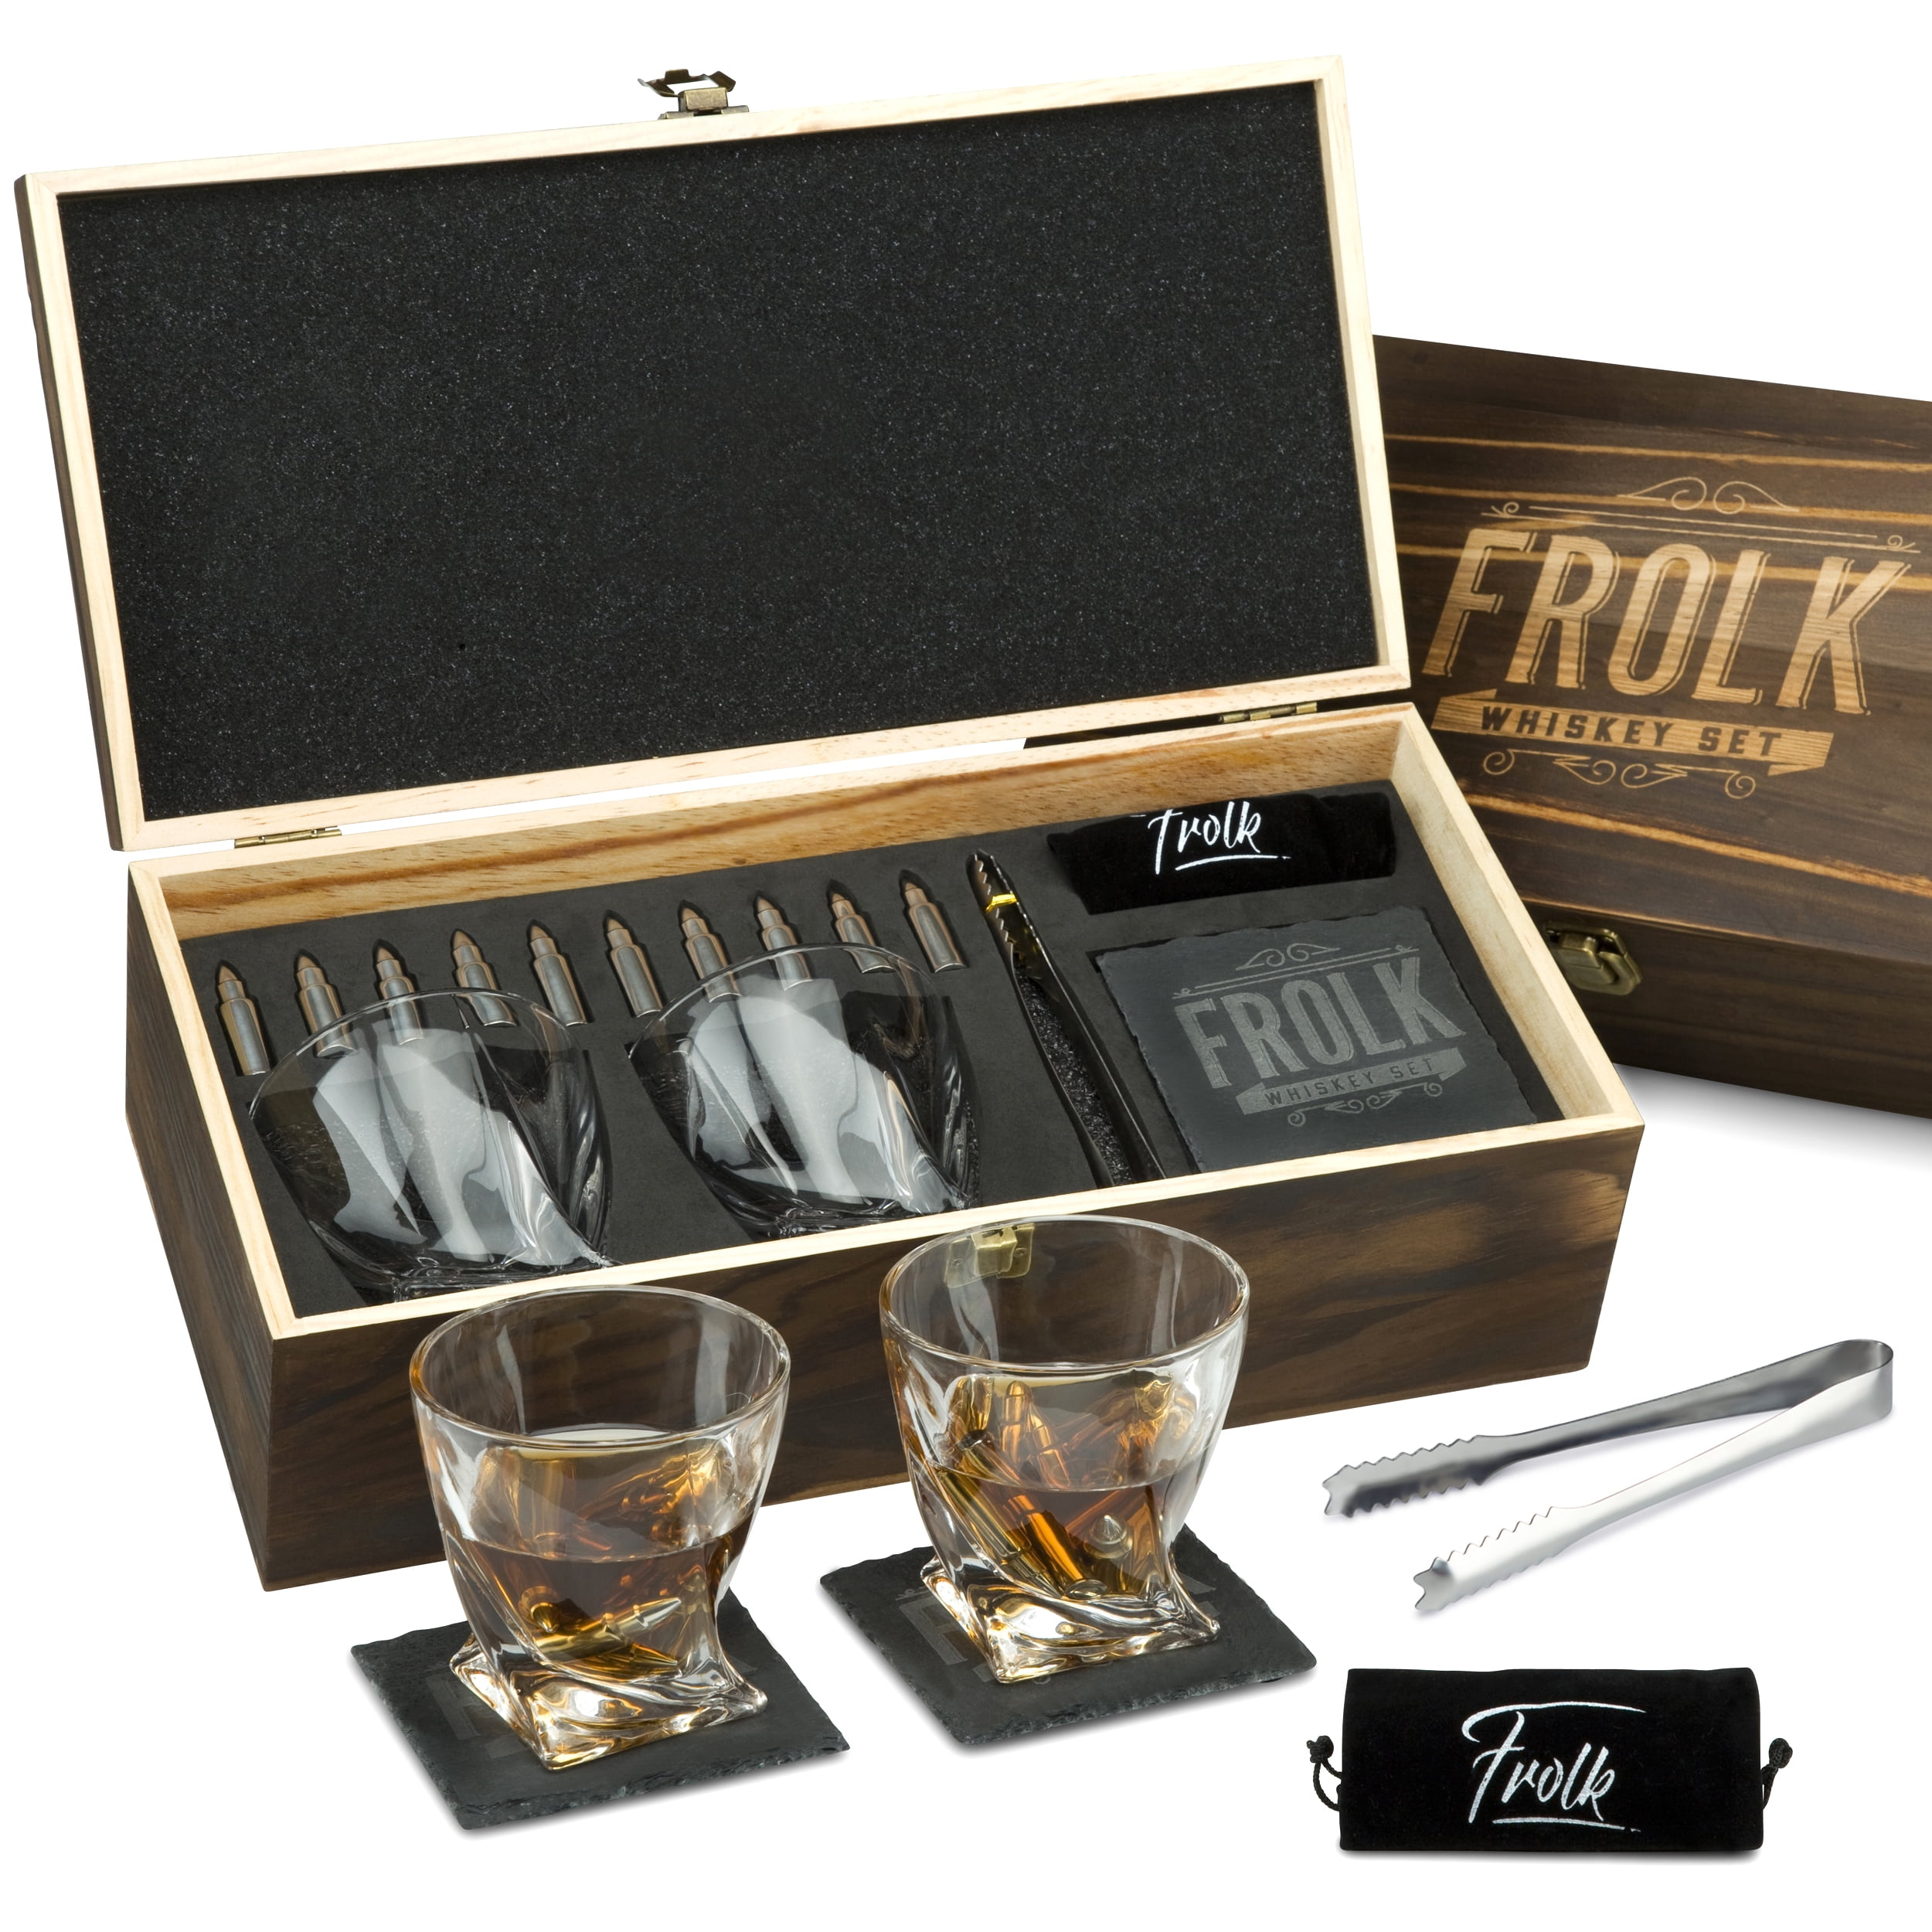 6 Chilling Rocks Large Crystal Drinking Cup Revolver Base In Fancy Wooden Box Twist Whiskey Glass and XL Bullet Stones Gift Set Tongs Cool Gift for Men Dad Boyfriend on Anniversary Retirement 